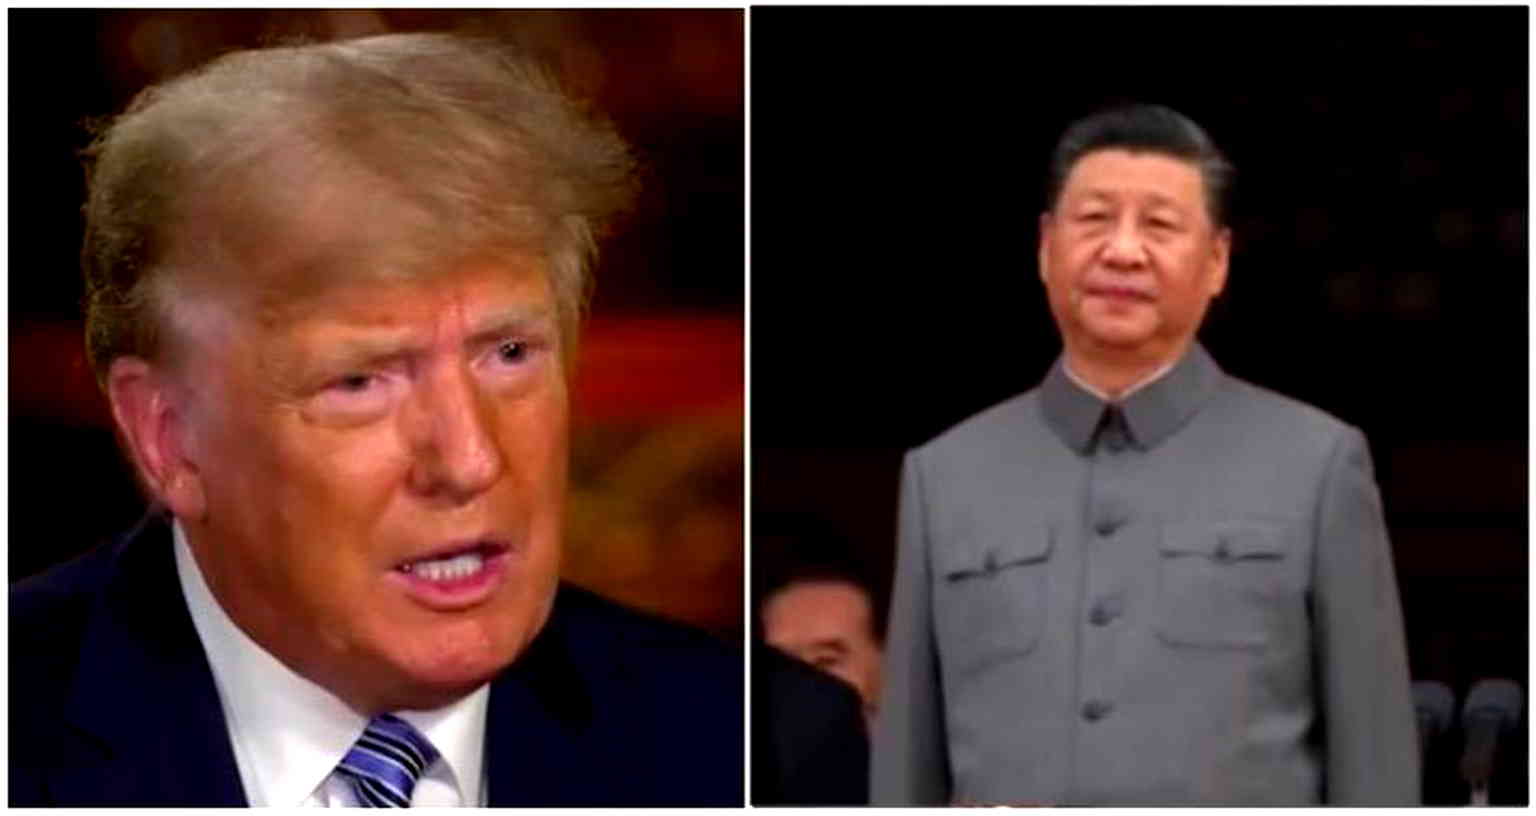 China’s government responds after Trump says it ‘destroyed the world’ with COVID, Xi is a ‘killer’